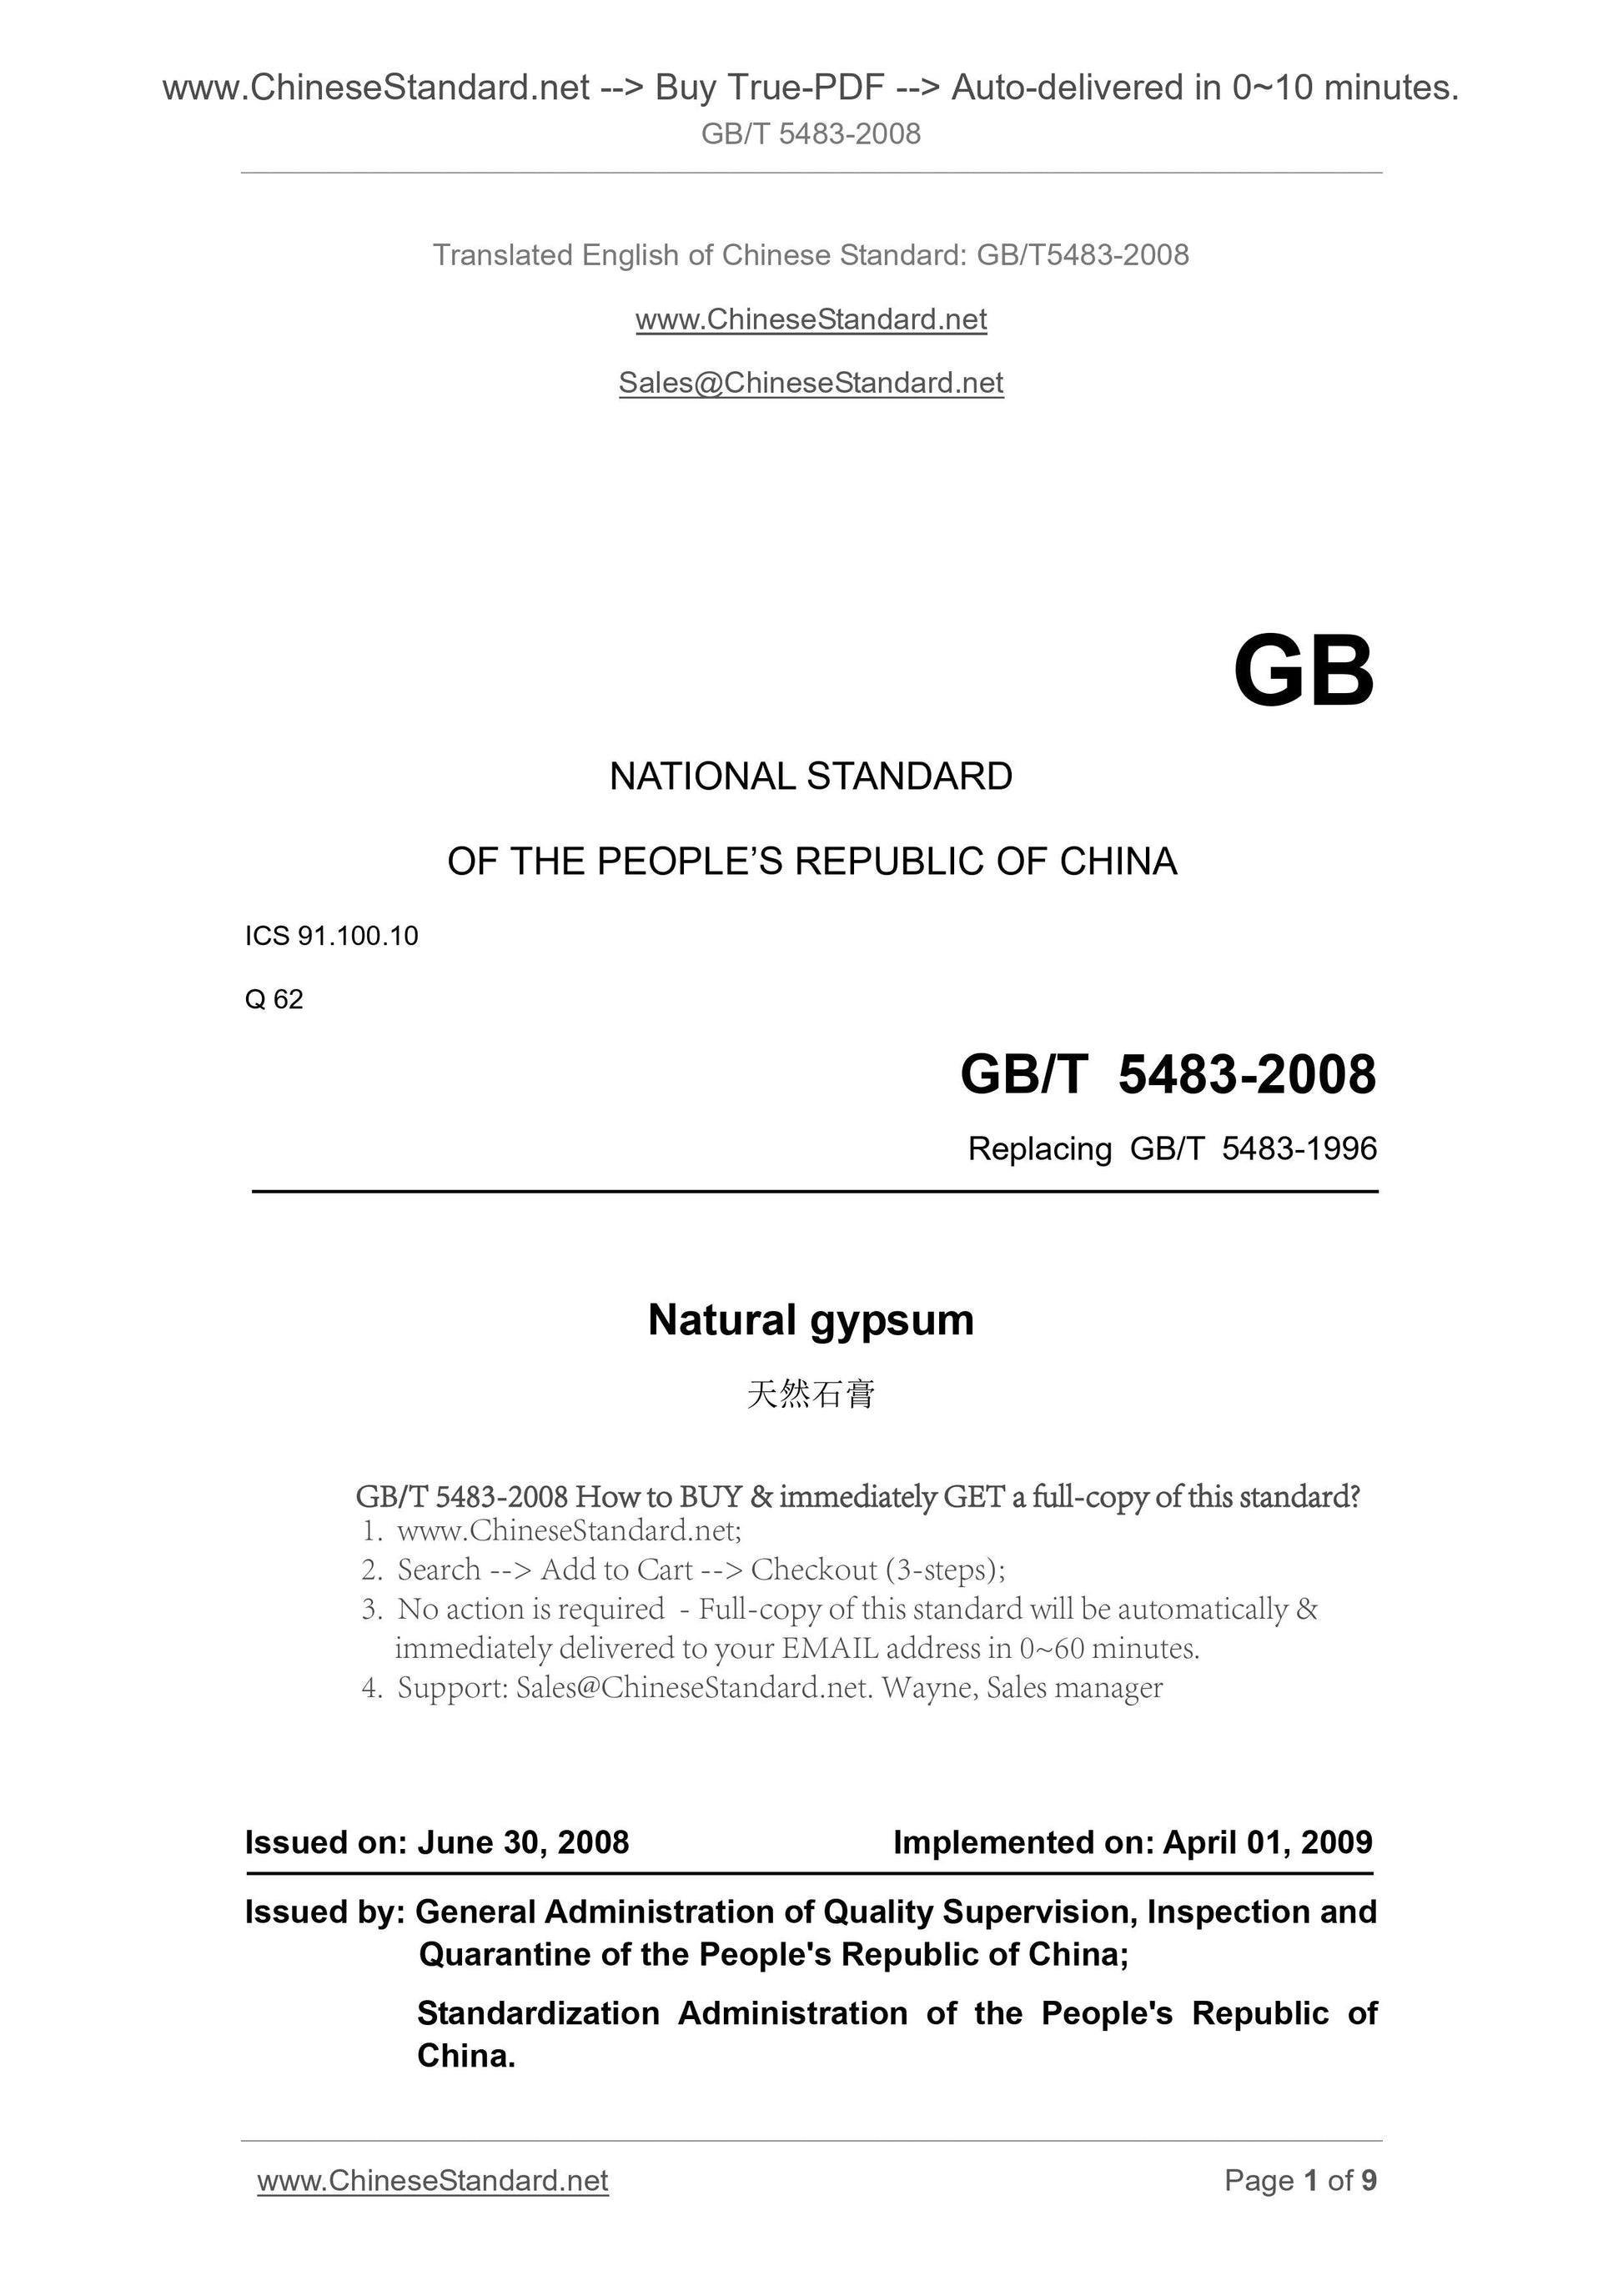 GB/T 5483-2008 Page 1